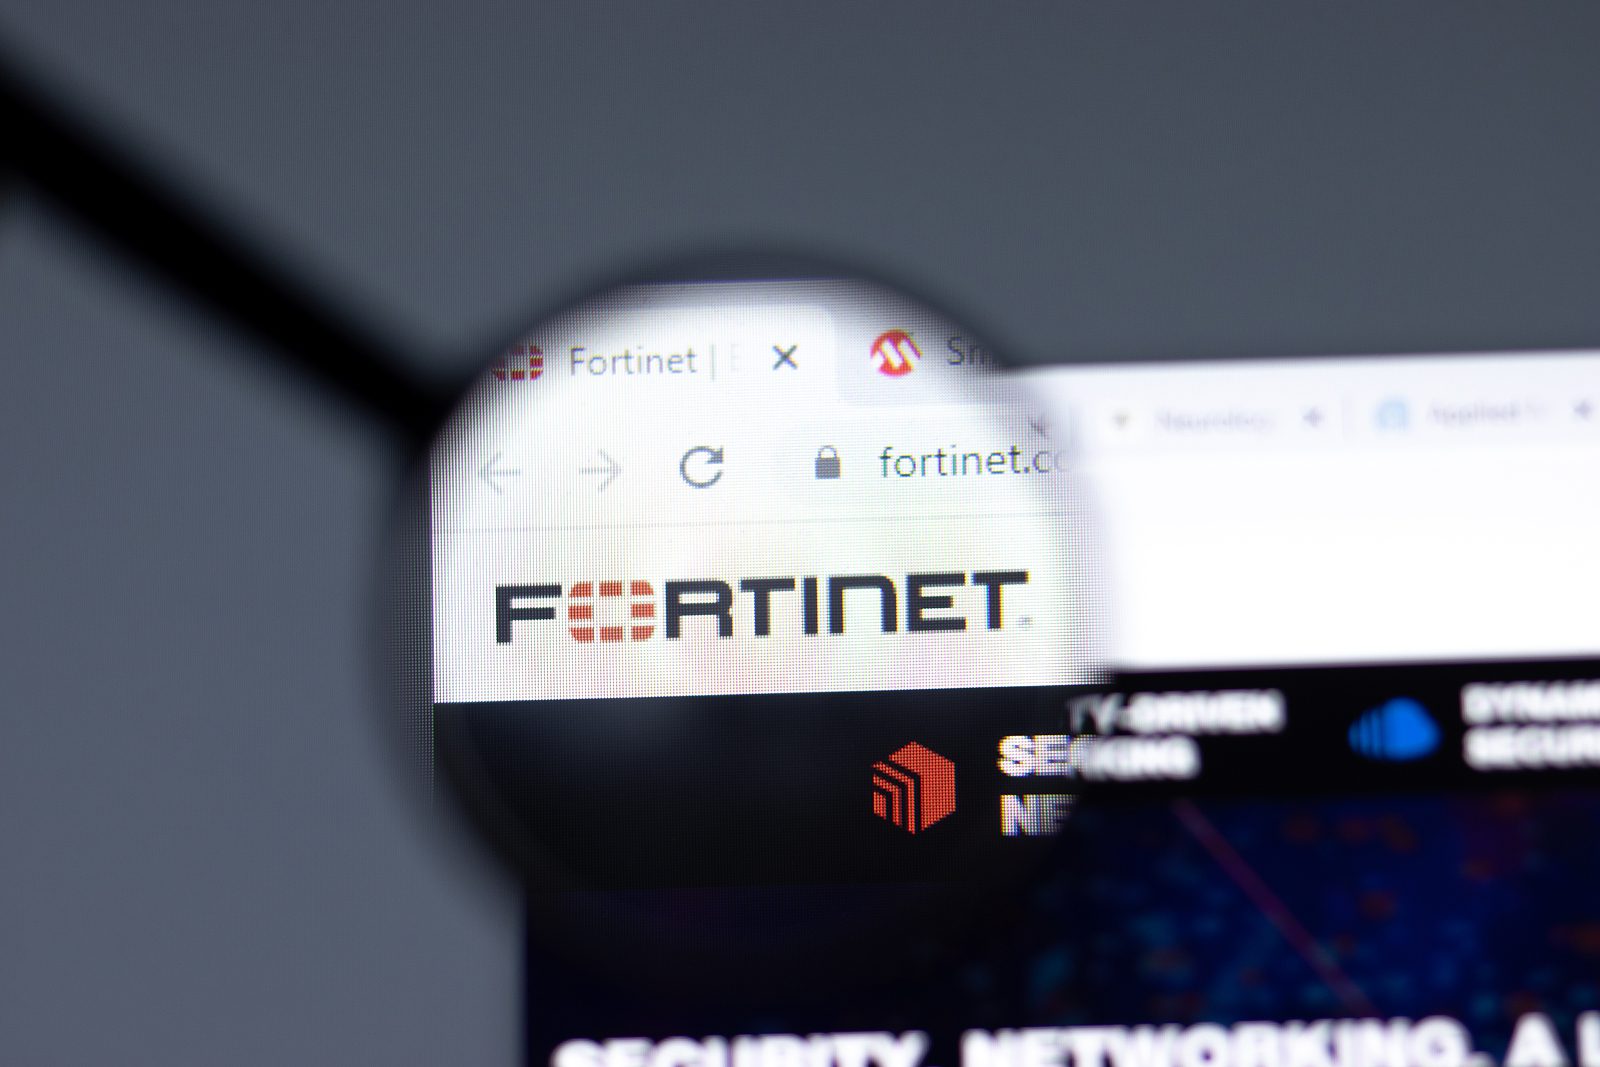 Fortinet Warns Customers of Possible Zero-Day Exploited in Limited Attacks – Source: www.securityweek.com